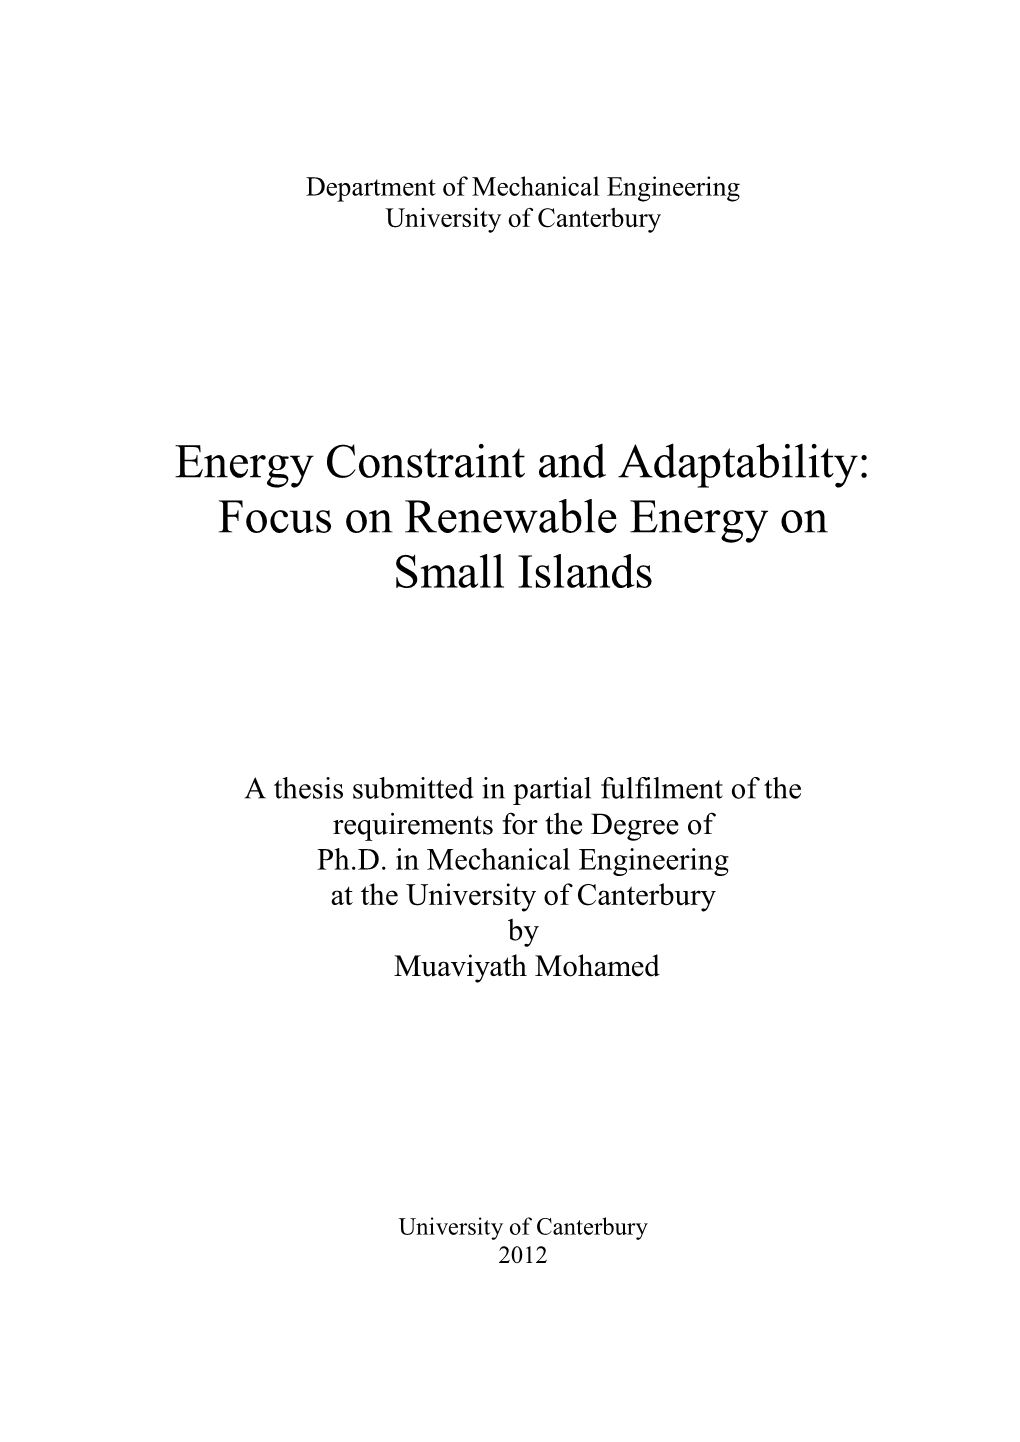 Energy Constraint and Adaptability: Focus on Renewable Energy on Small Islands